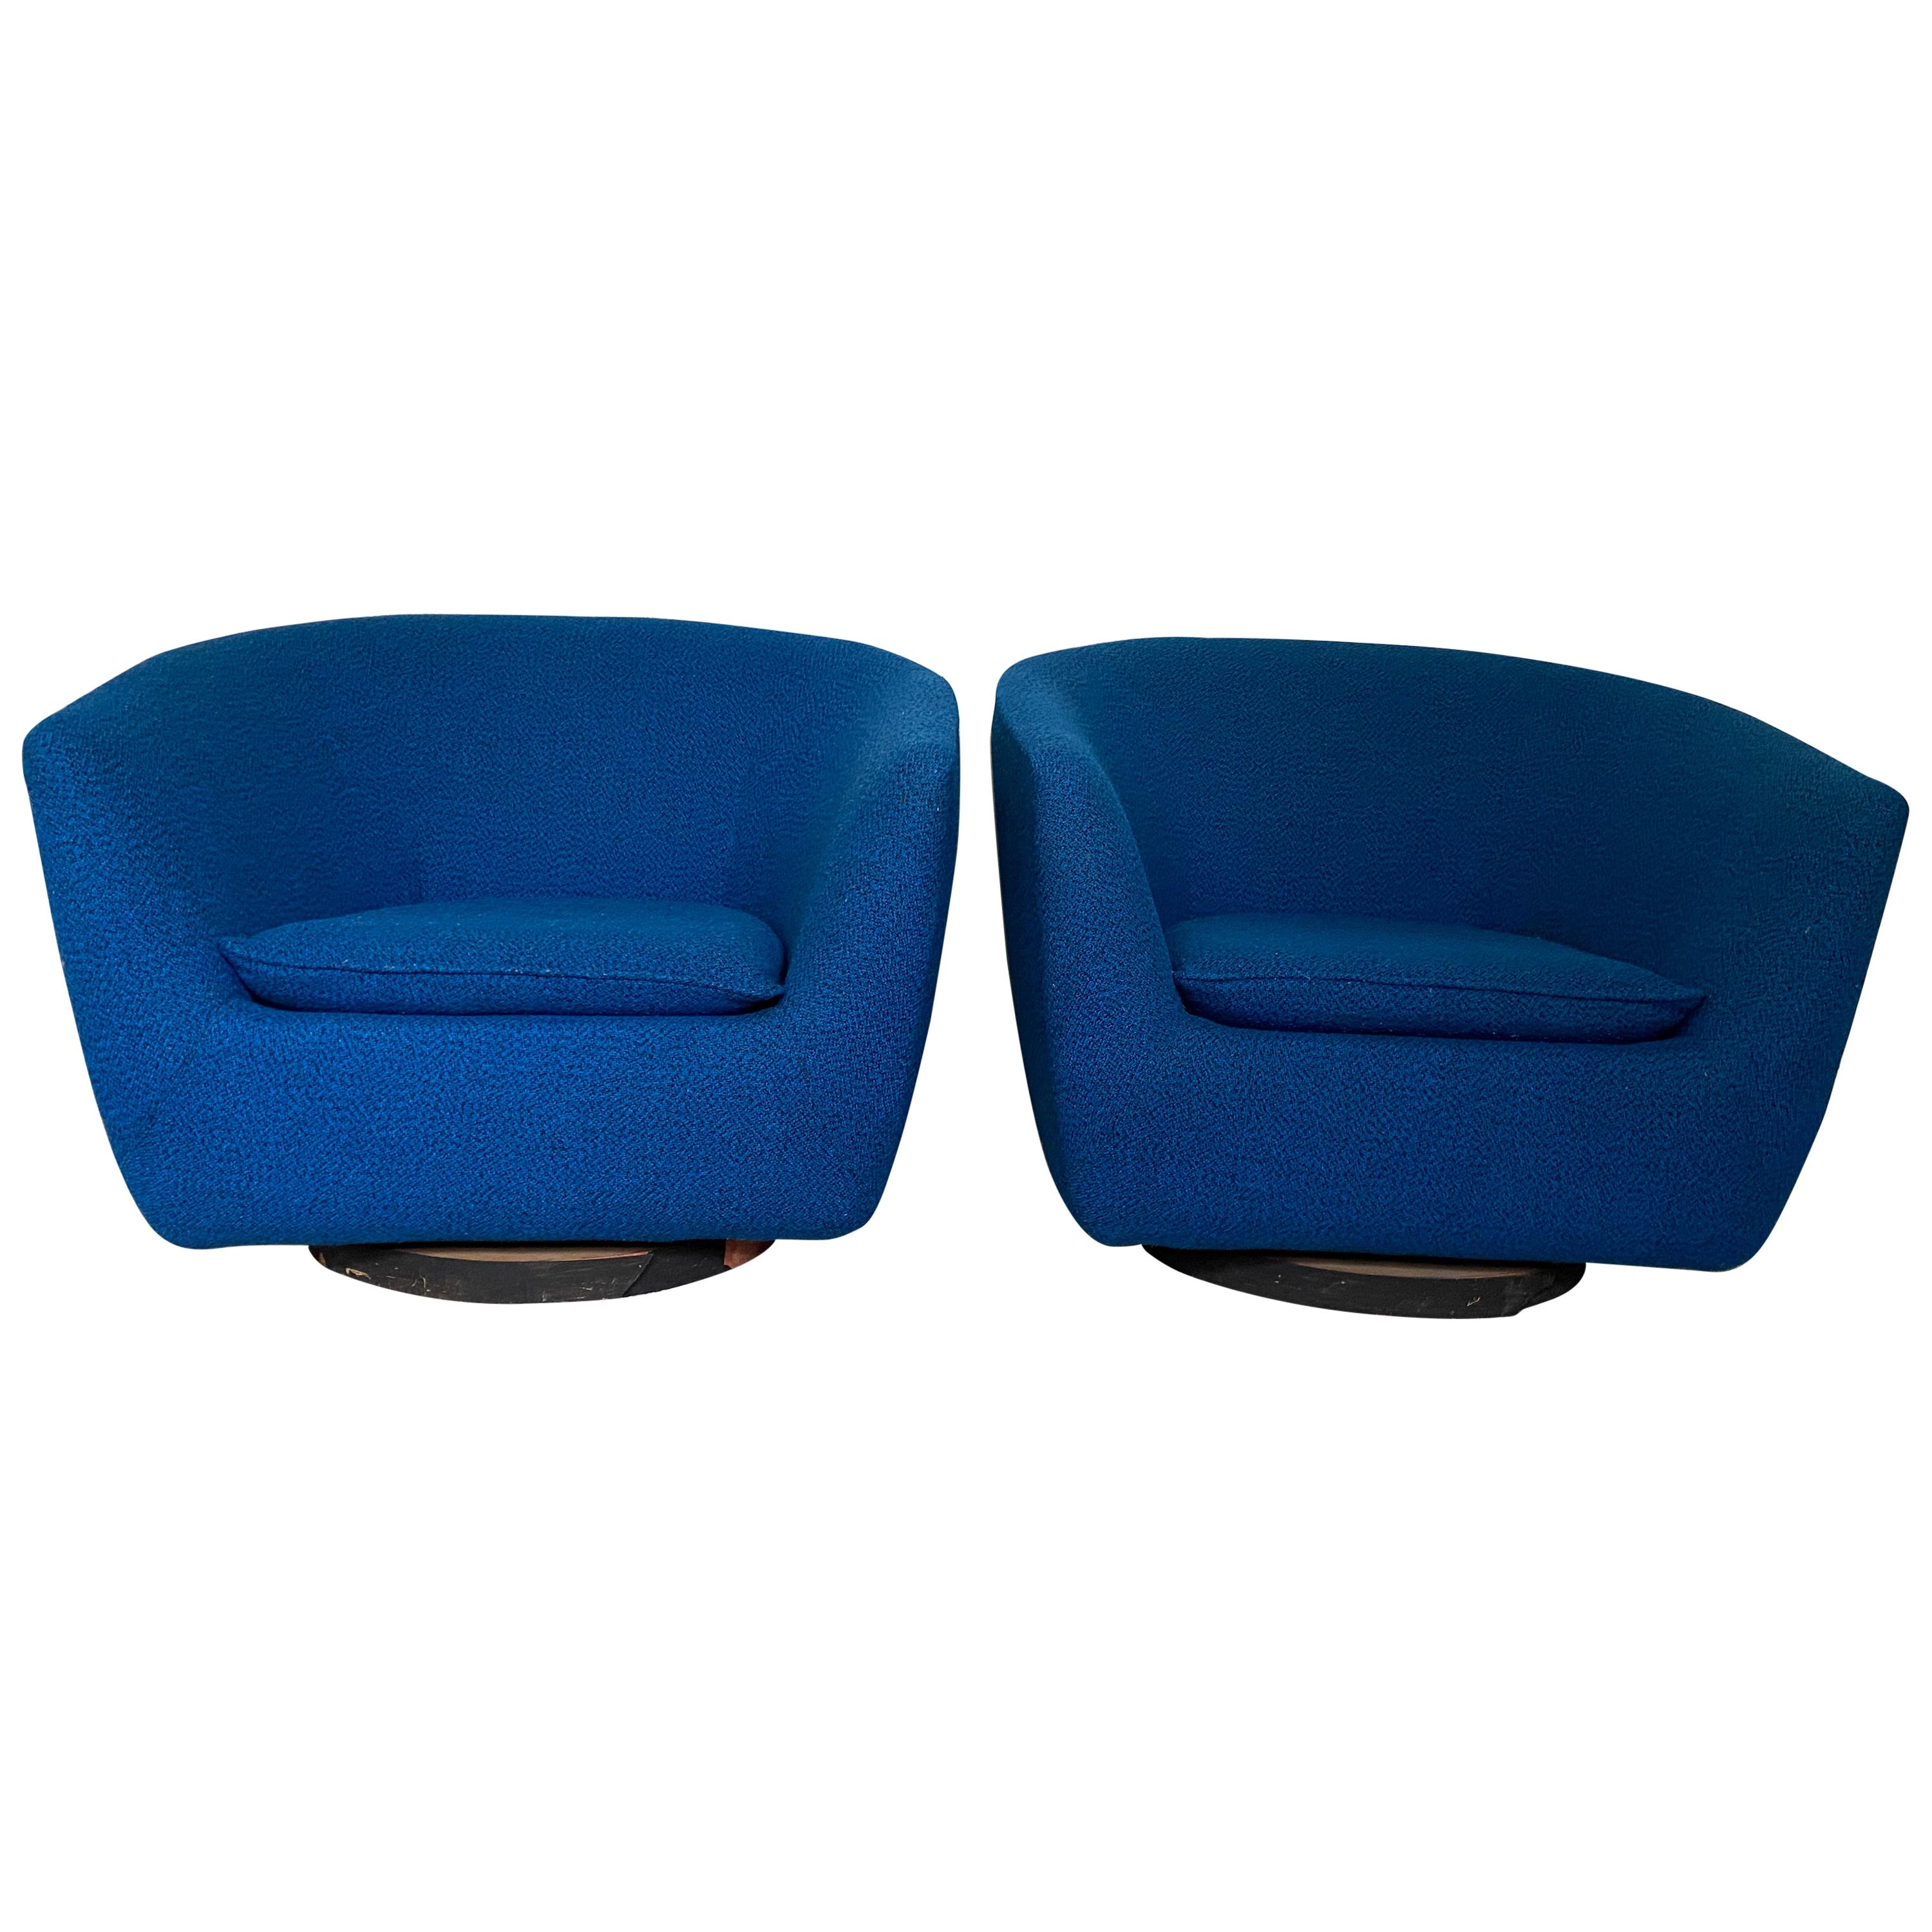 Pair of Vintage Swivel Lounge Chairs